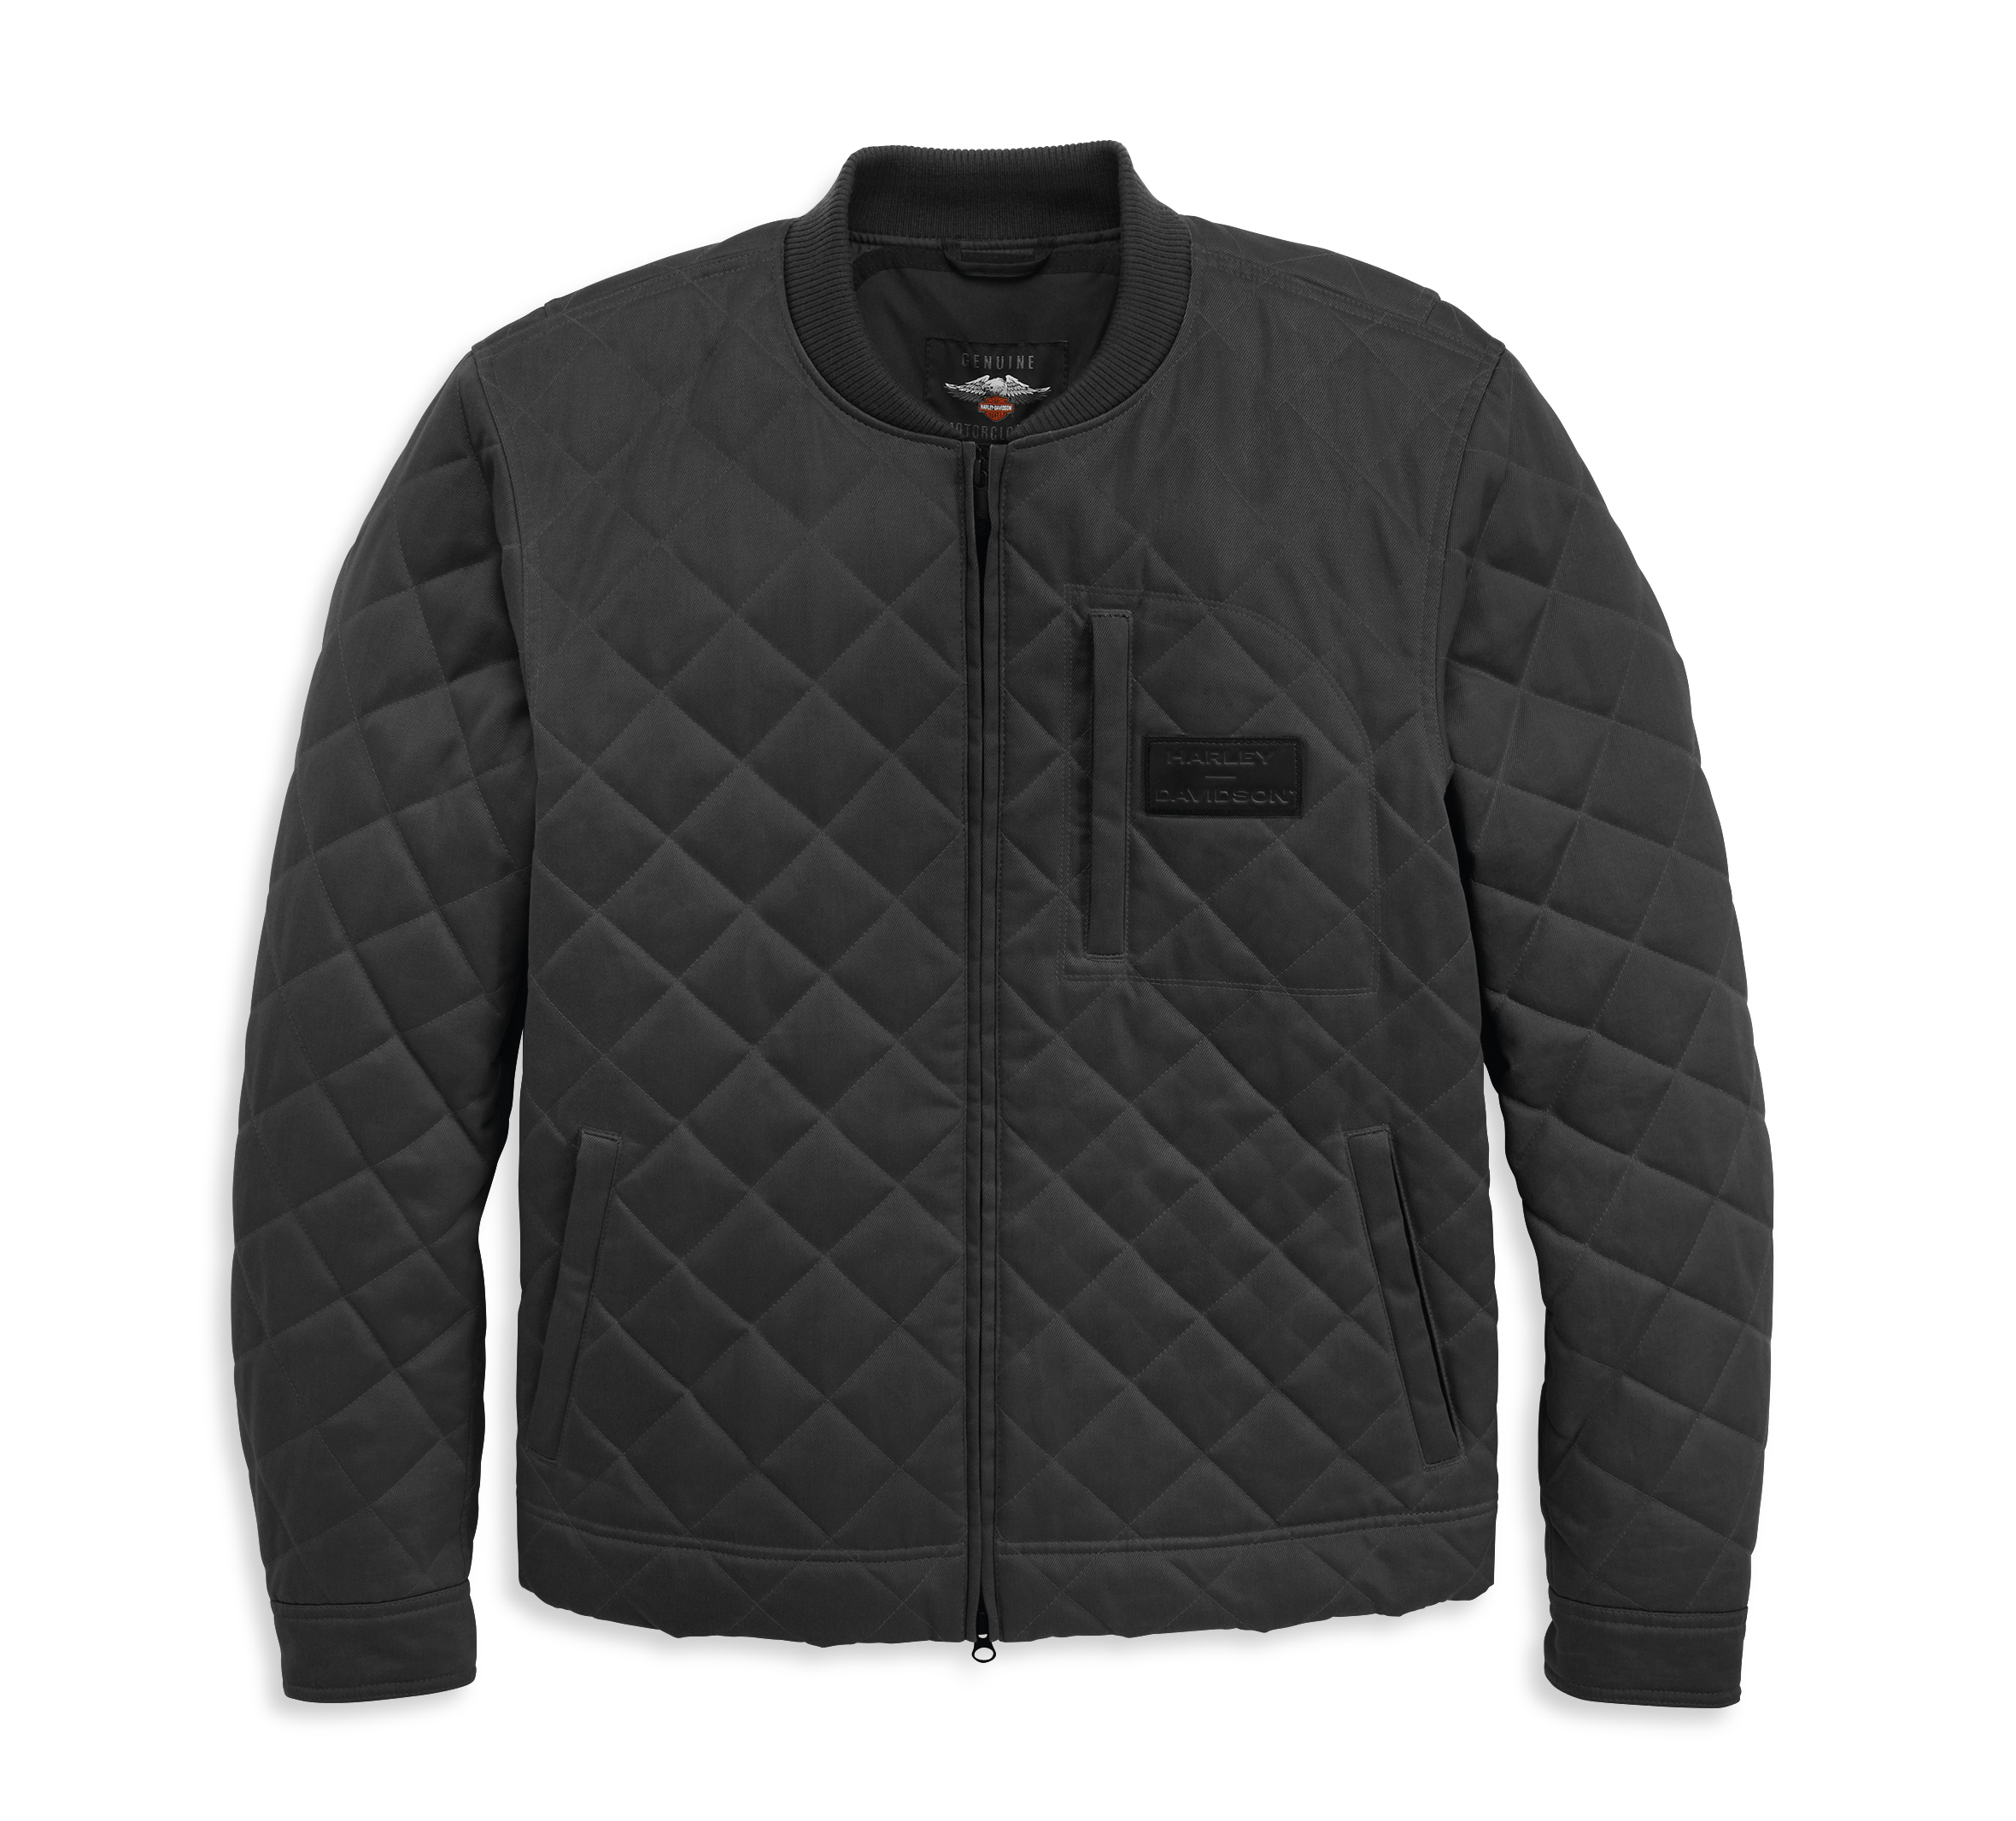 Mens Quilted Riding Jacket | vlr.eng.br